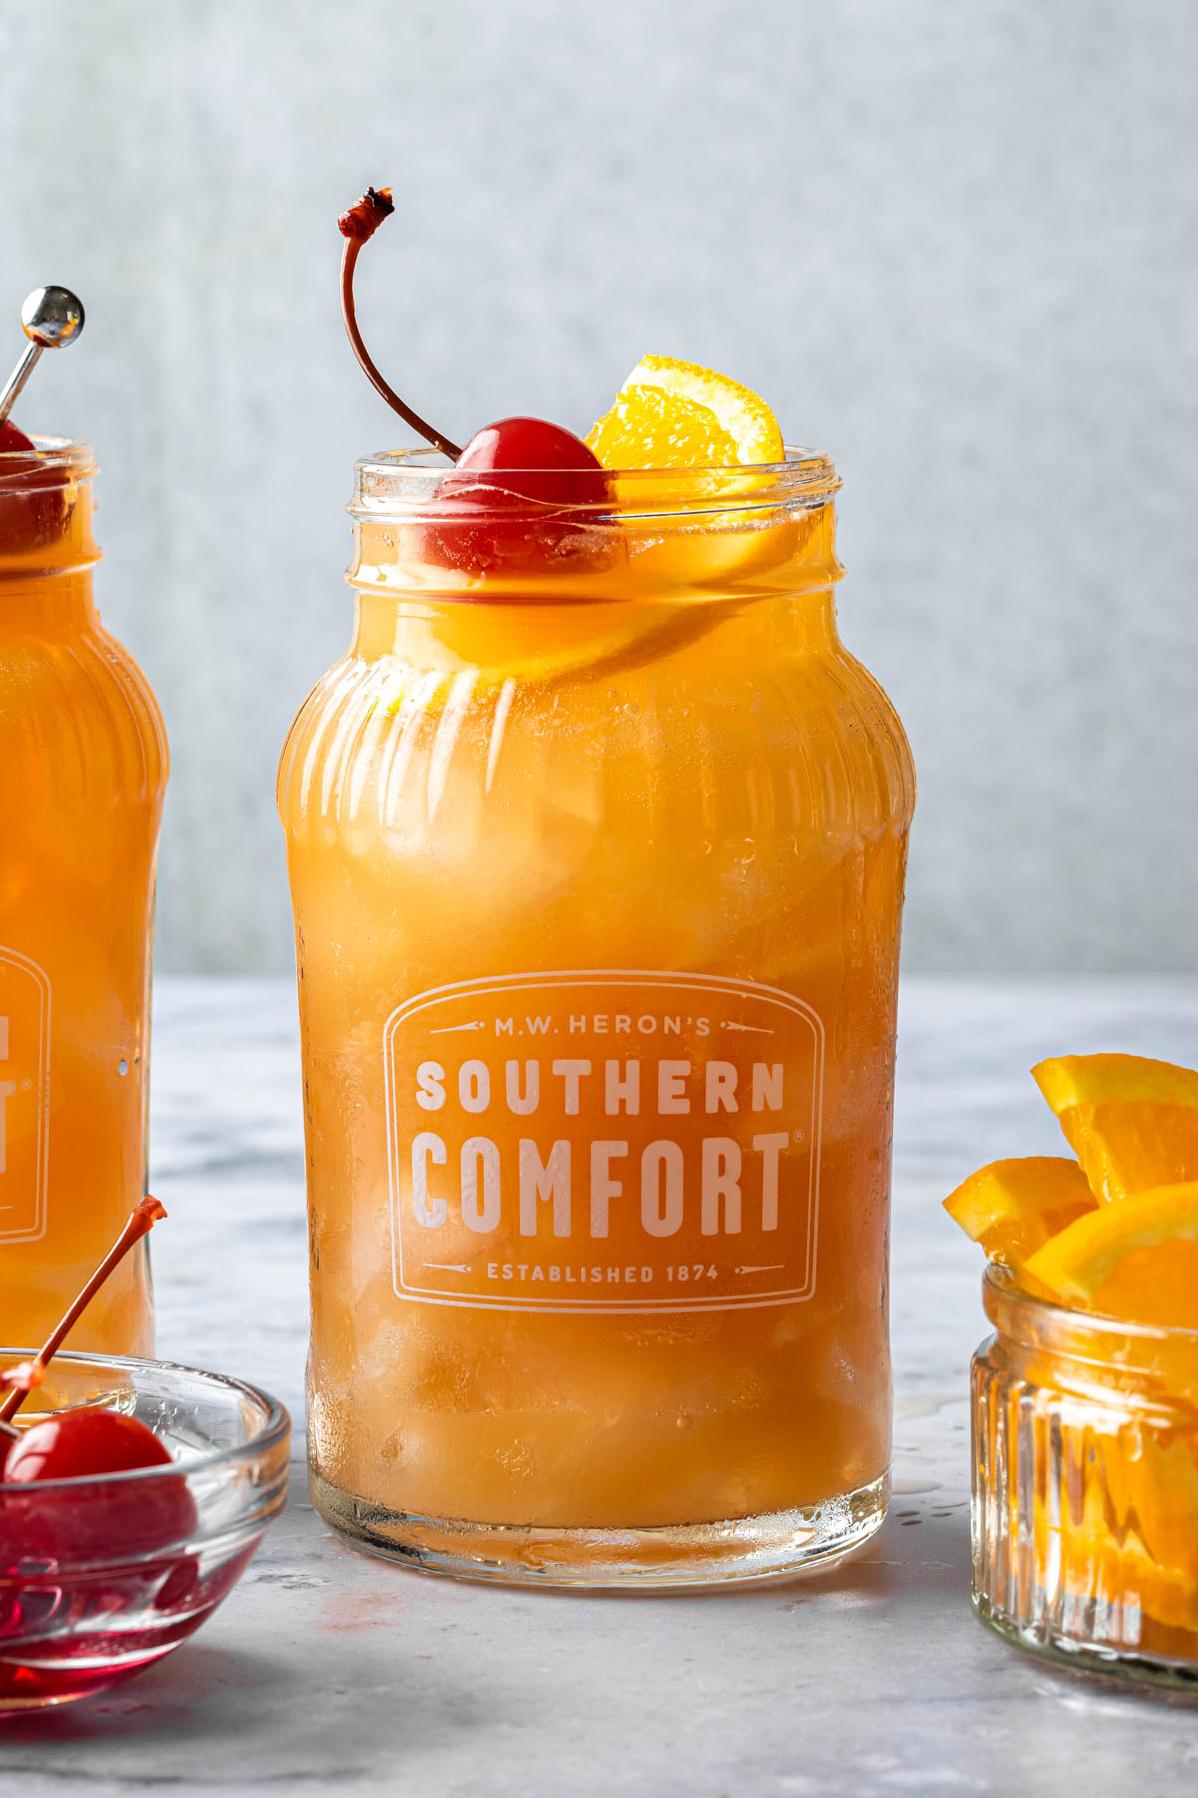  The sweet and savory combination of fresh fruit and Southern Comfort will have you coming back for seconds.